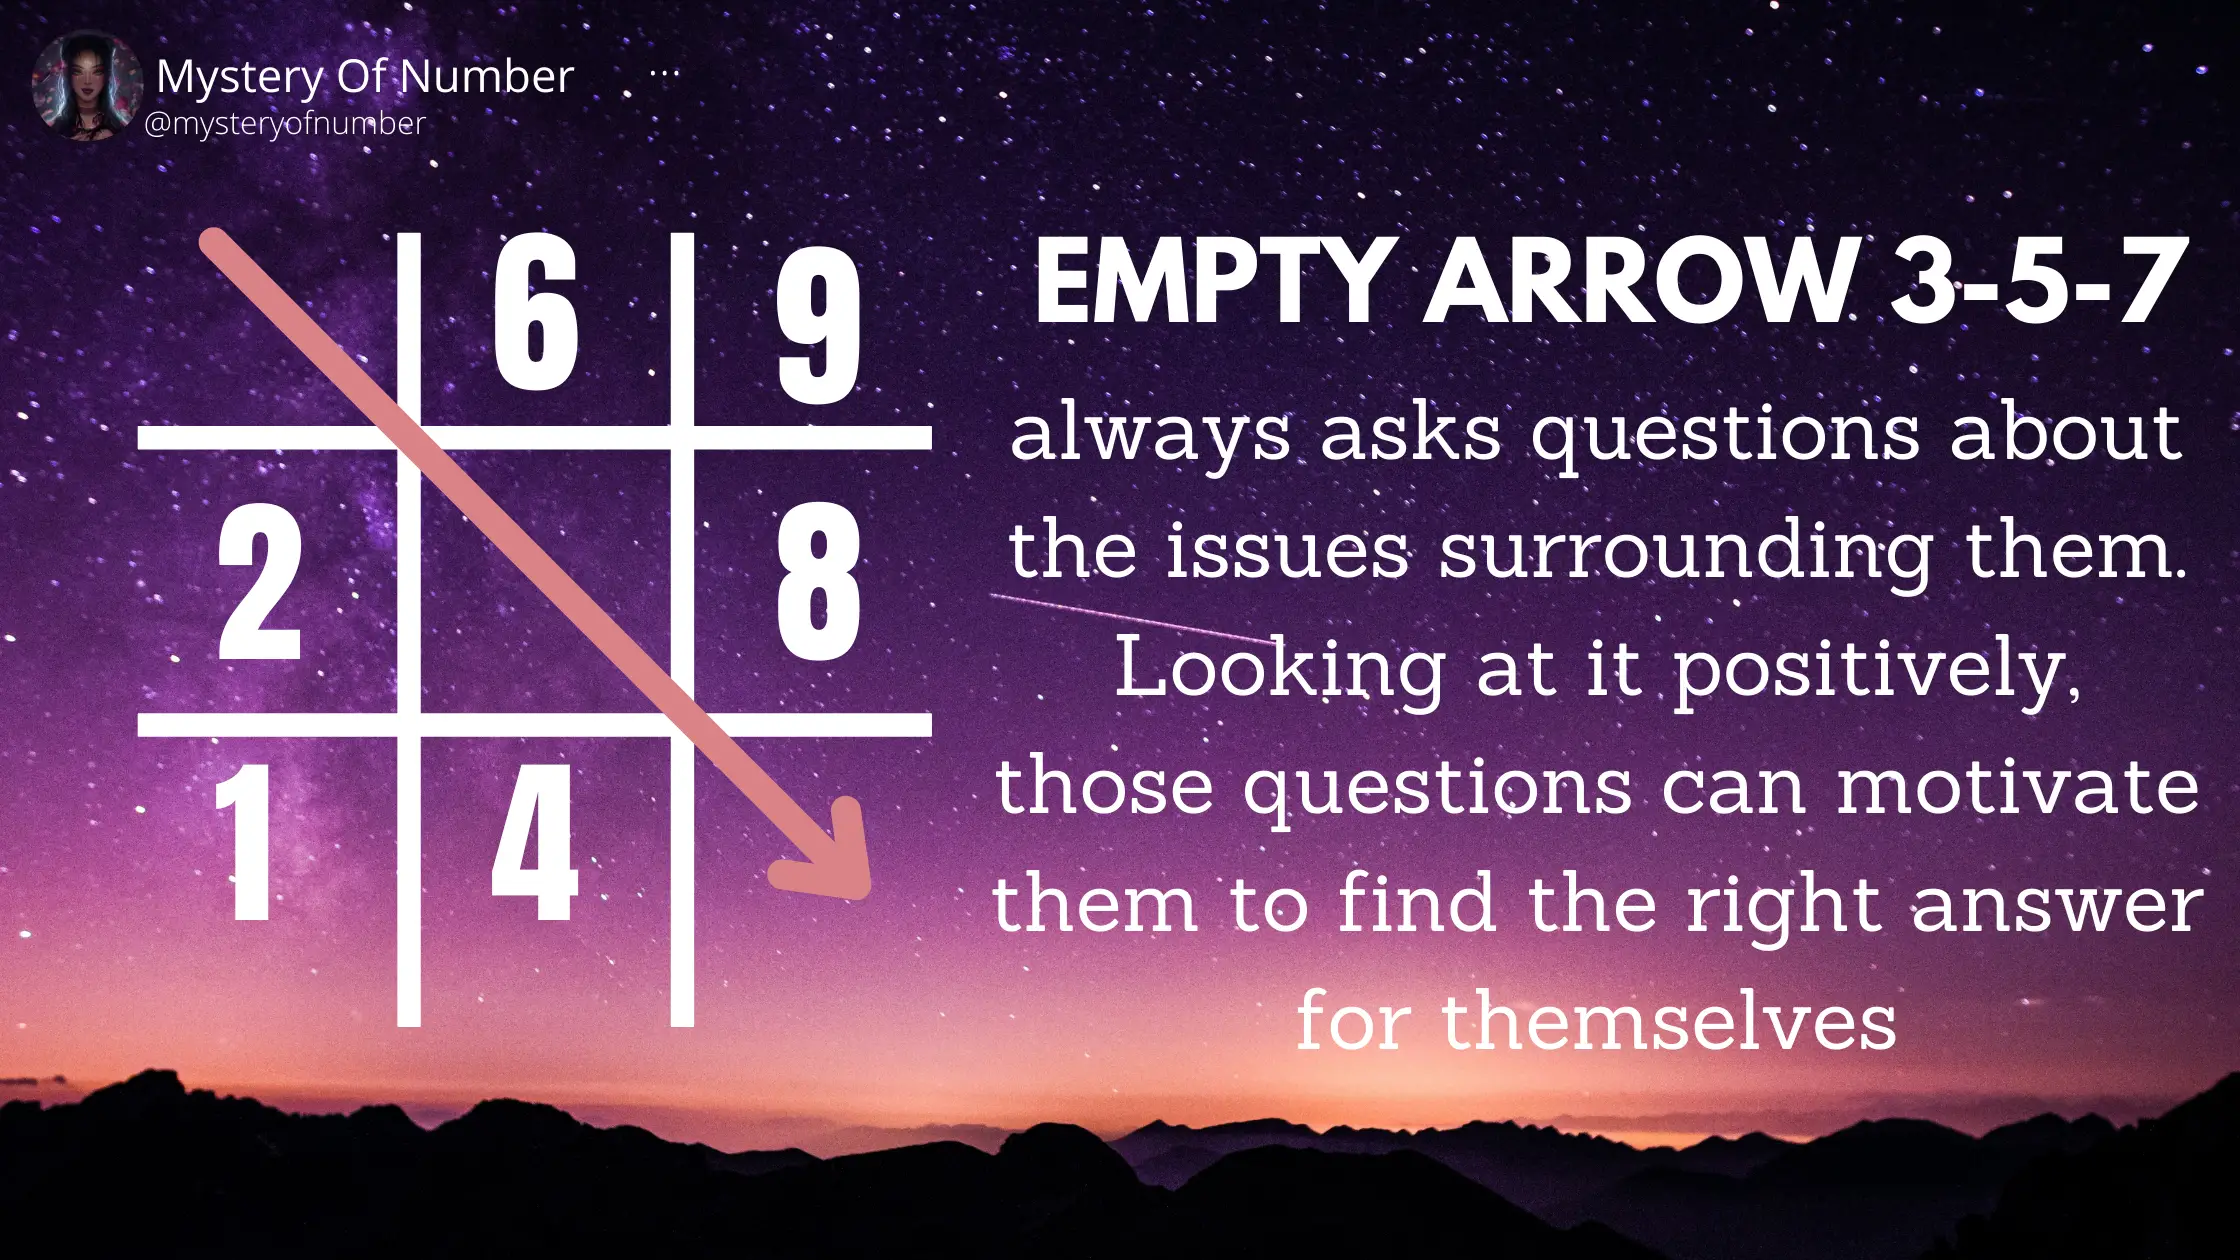 Meaning of empty arrows in numerology